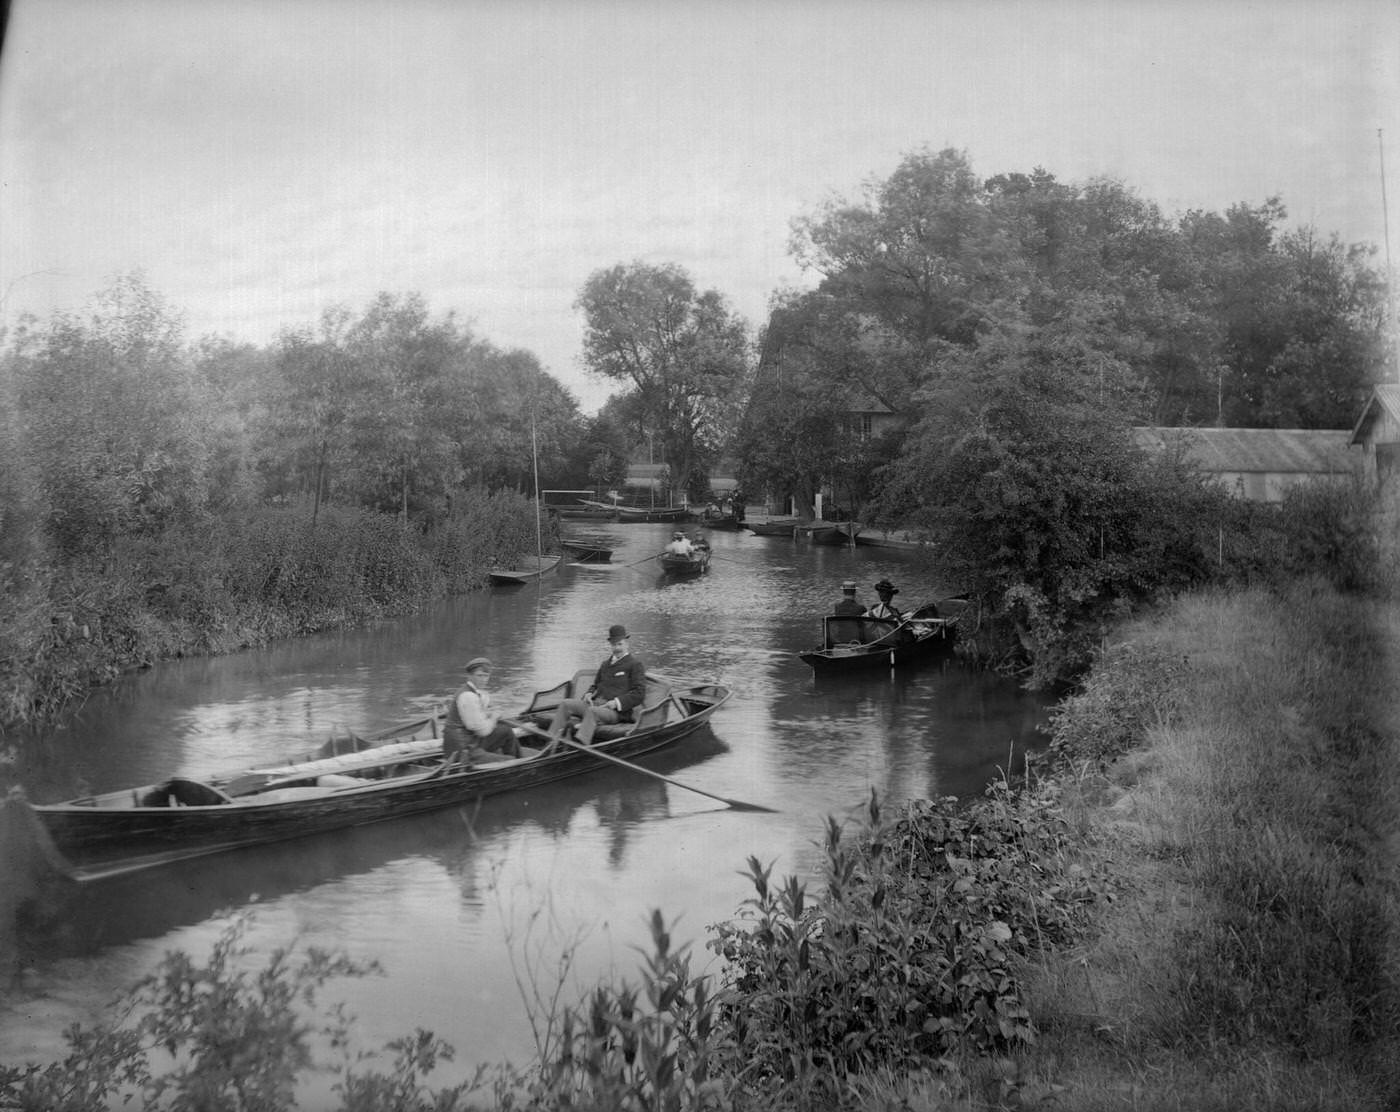 Rowers relax on the River Thames between Teddington and Surbiton, 1905